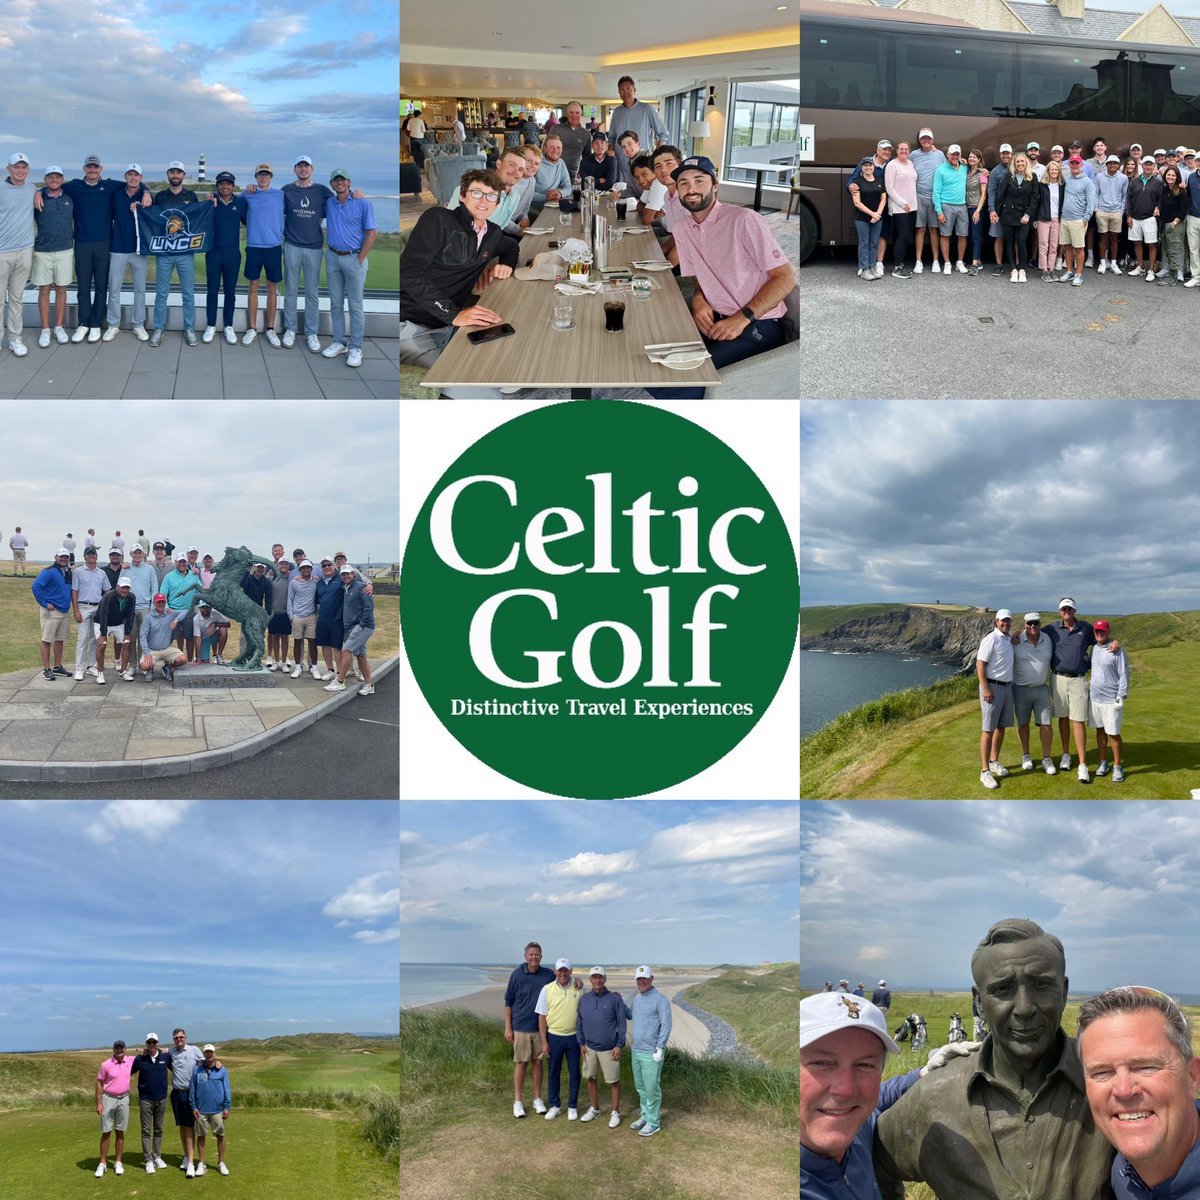 Thank you to all our donors, alumni, parents and administration for providing our players such an once in a lifetime experience in Ireland!  A big shoutout to @CelticGolf  They are the best in the business! #letsgoG ⚔️🇮🇪